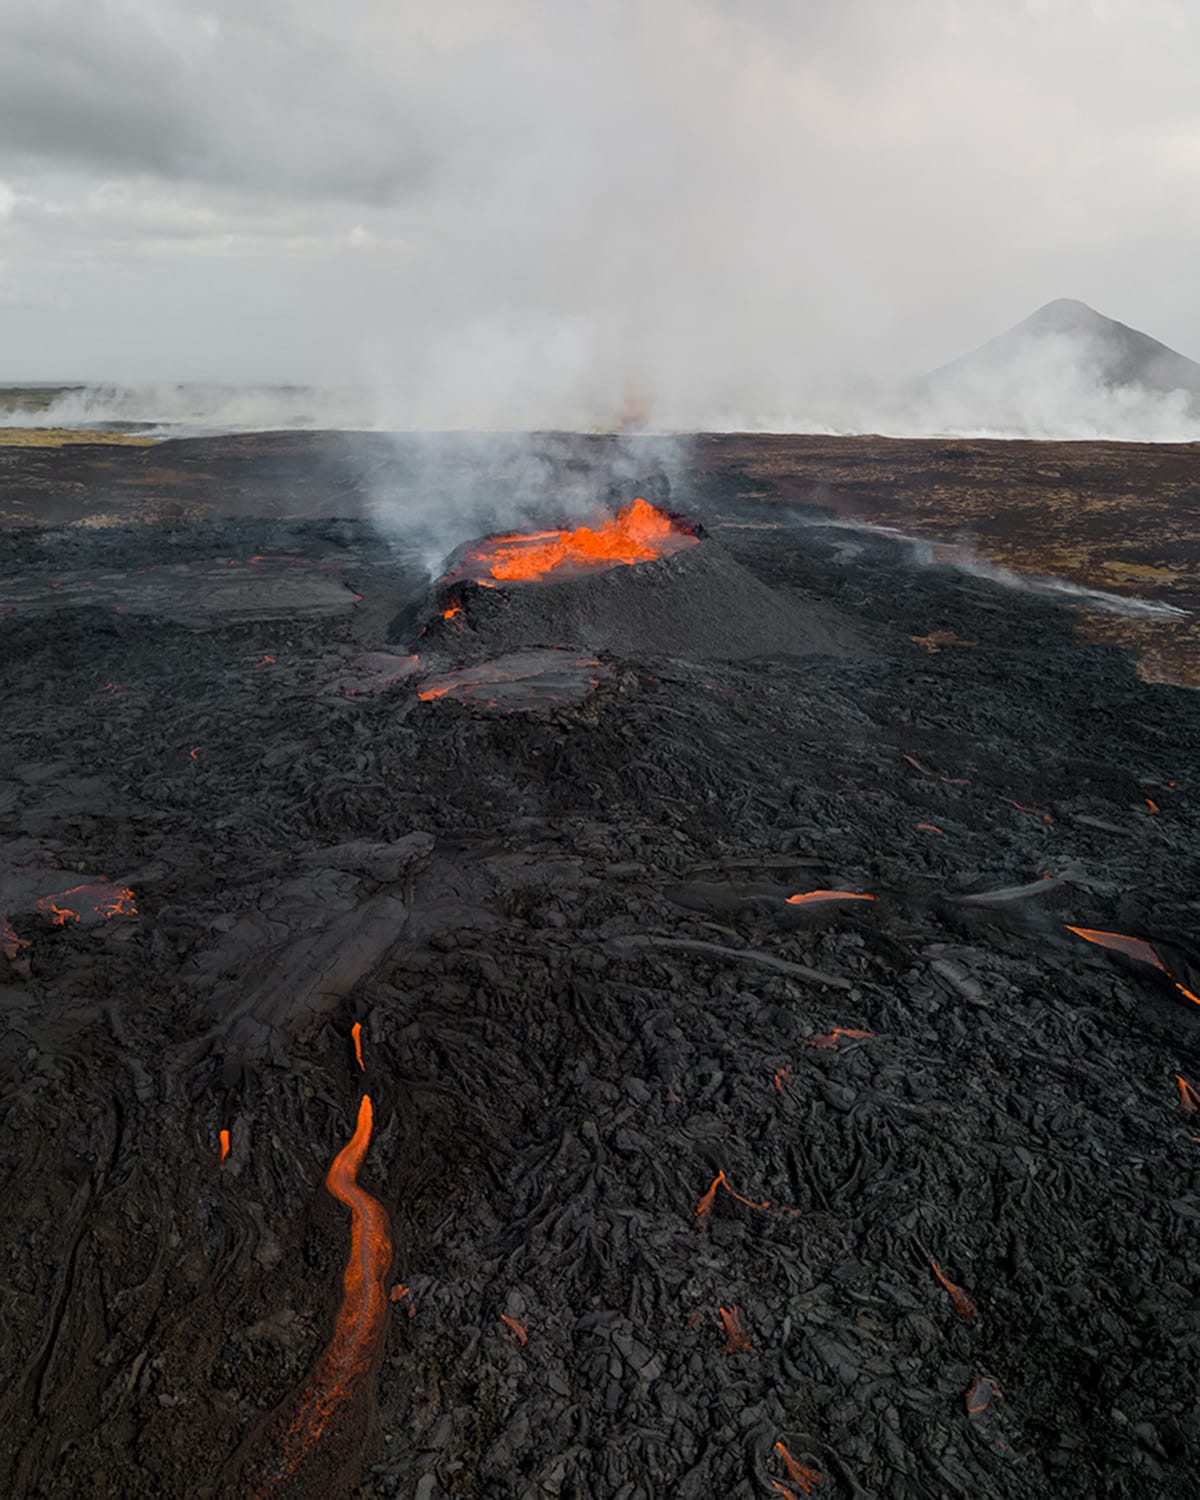 A live volcano spewing bright orange lava. Around the volcano is hardened black lava with orange and black patterns flowing away from it